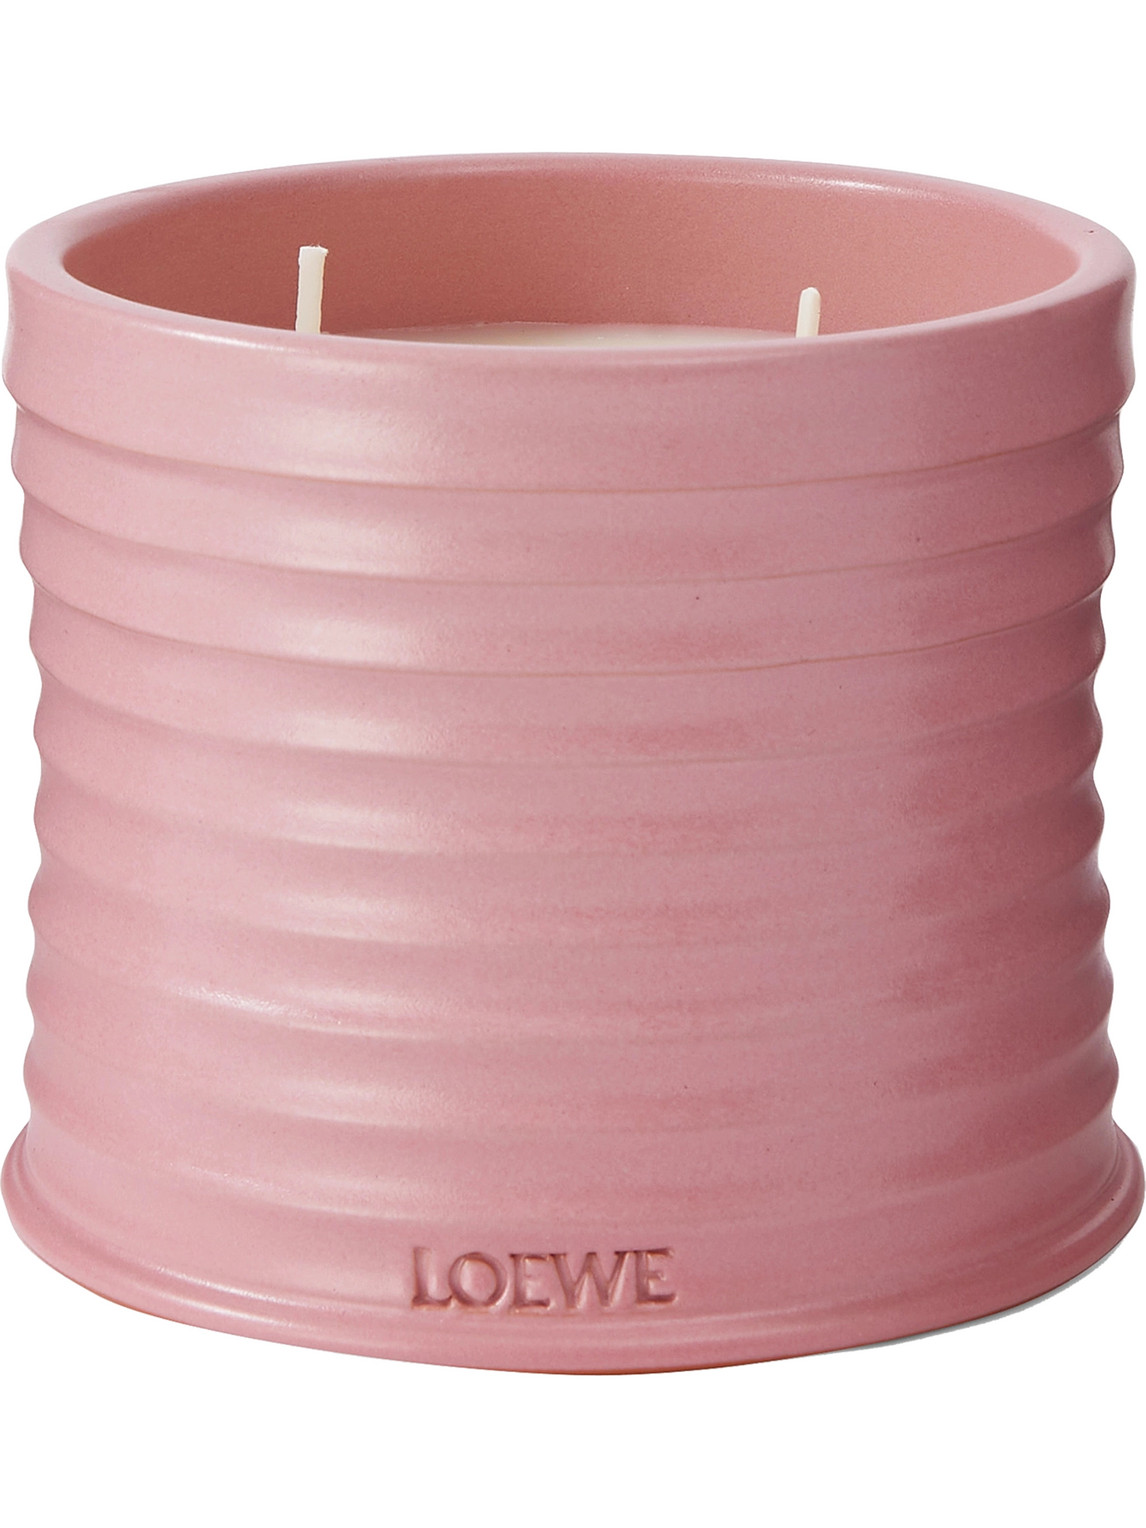 LOEWE IVY SCENTED CANDLE, 610G